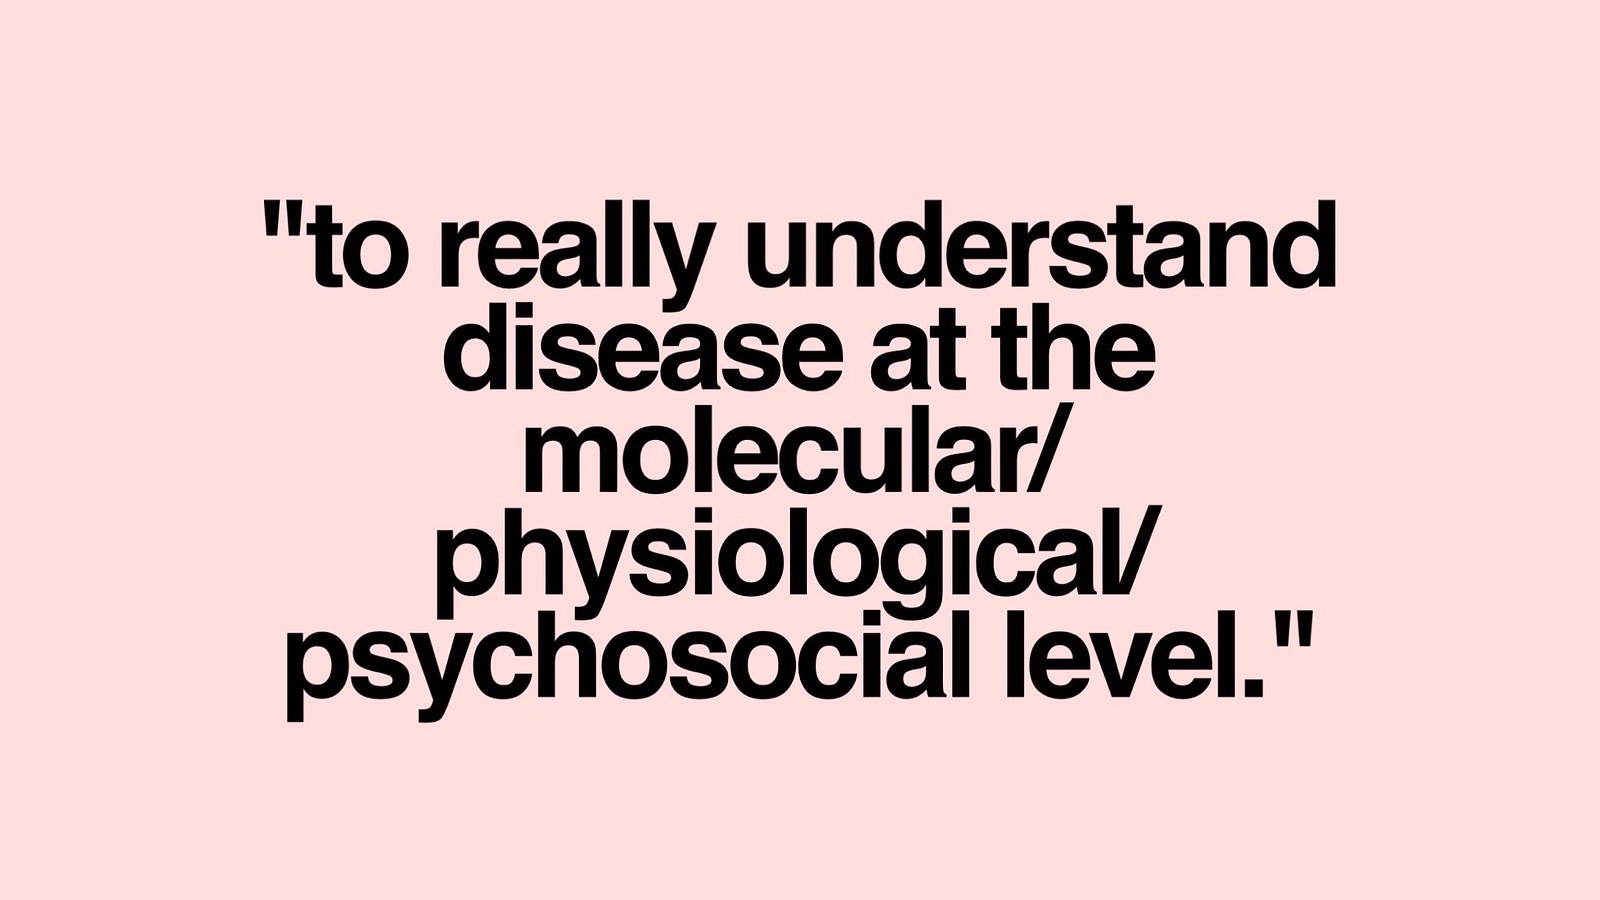 To really understand disease at the molecular/physiological/psychosocial level.